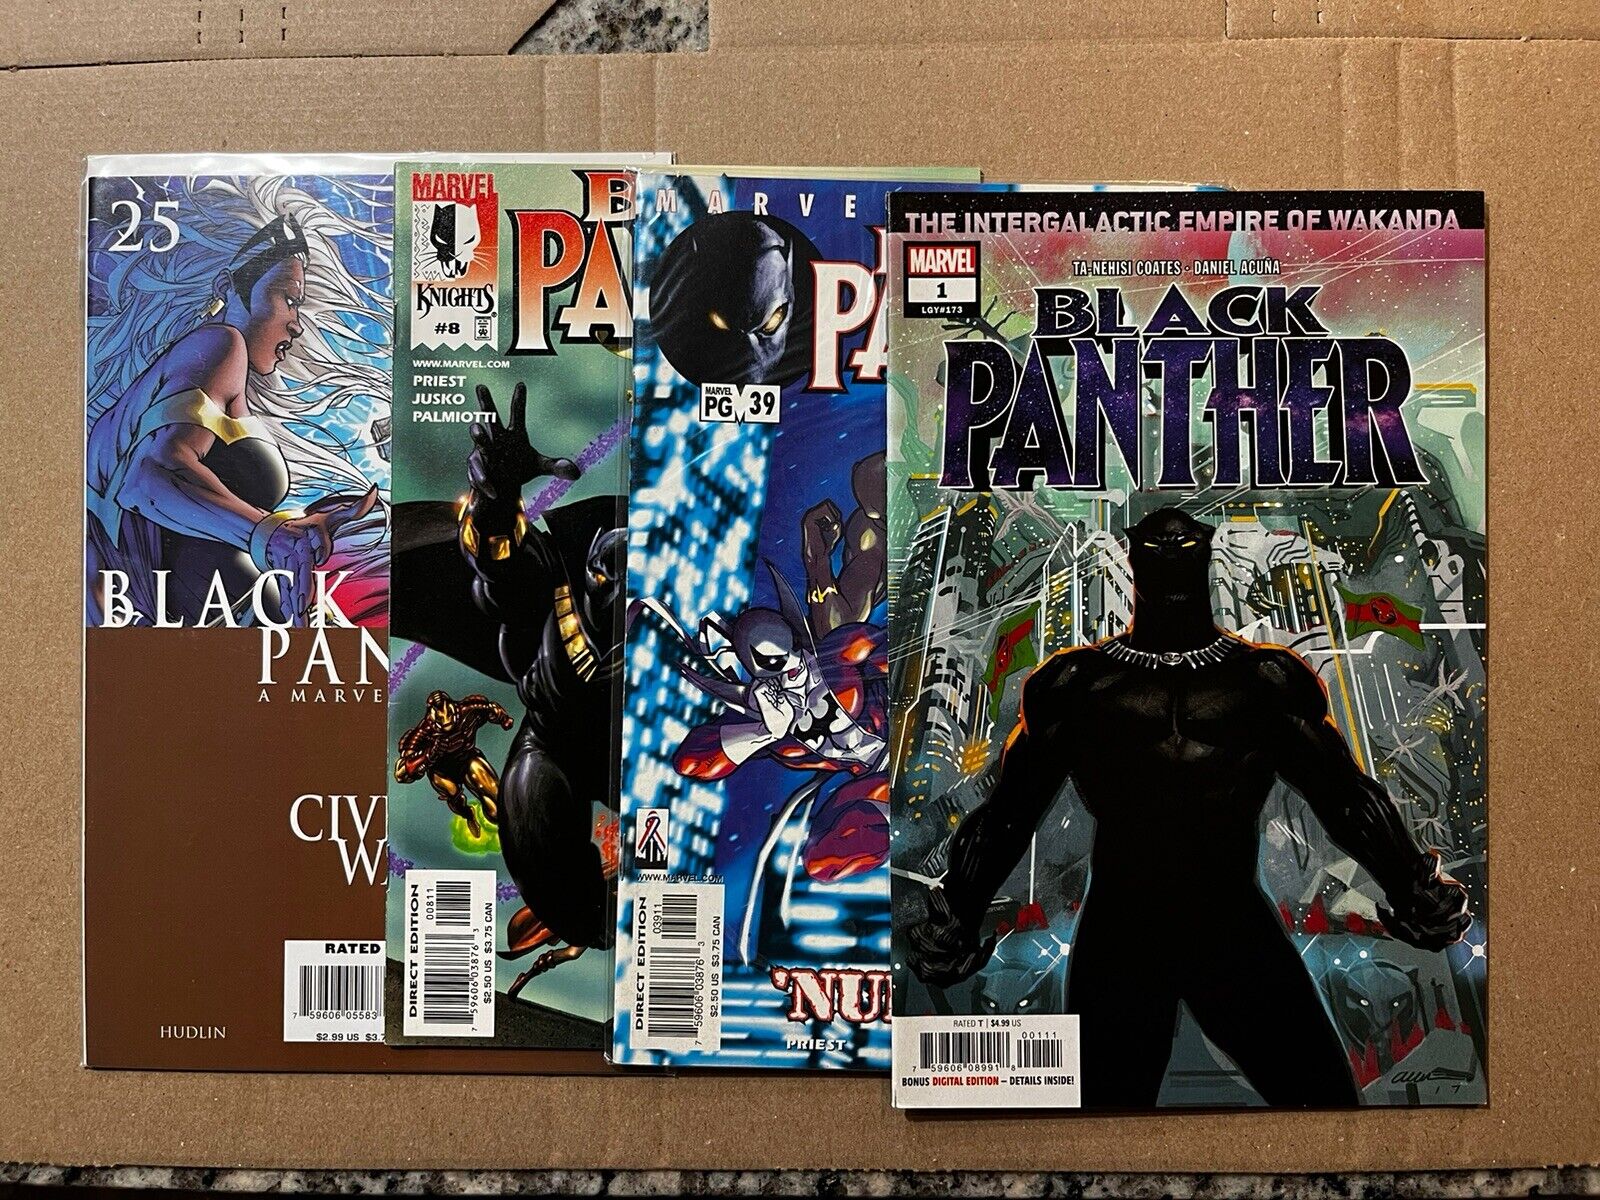 Black Panther Lot: Includes 1 Acuna